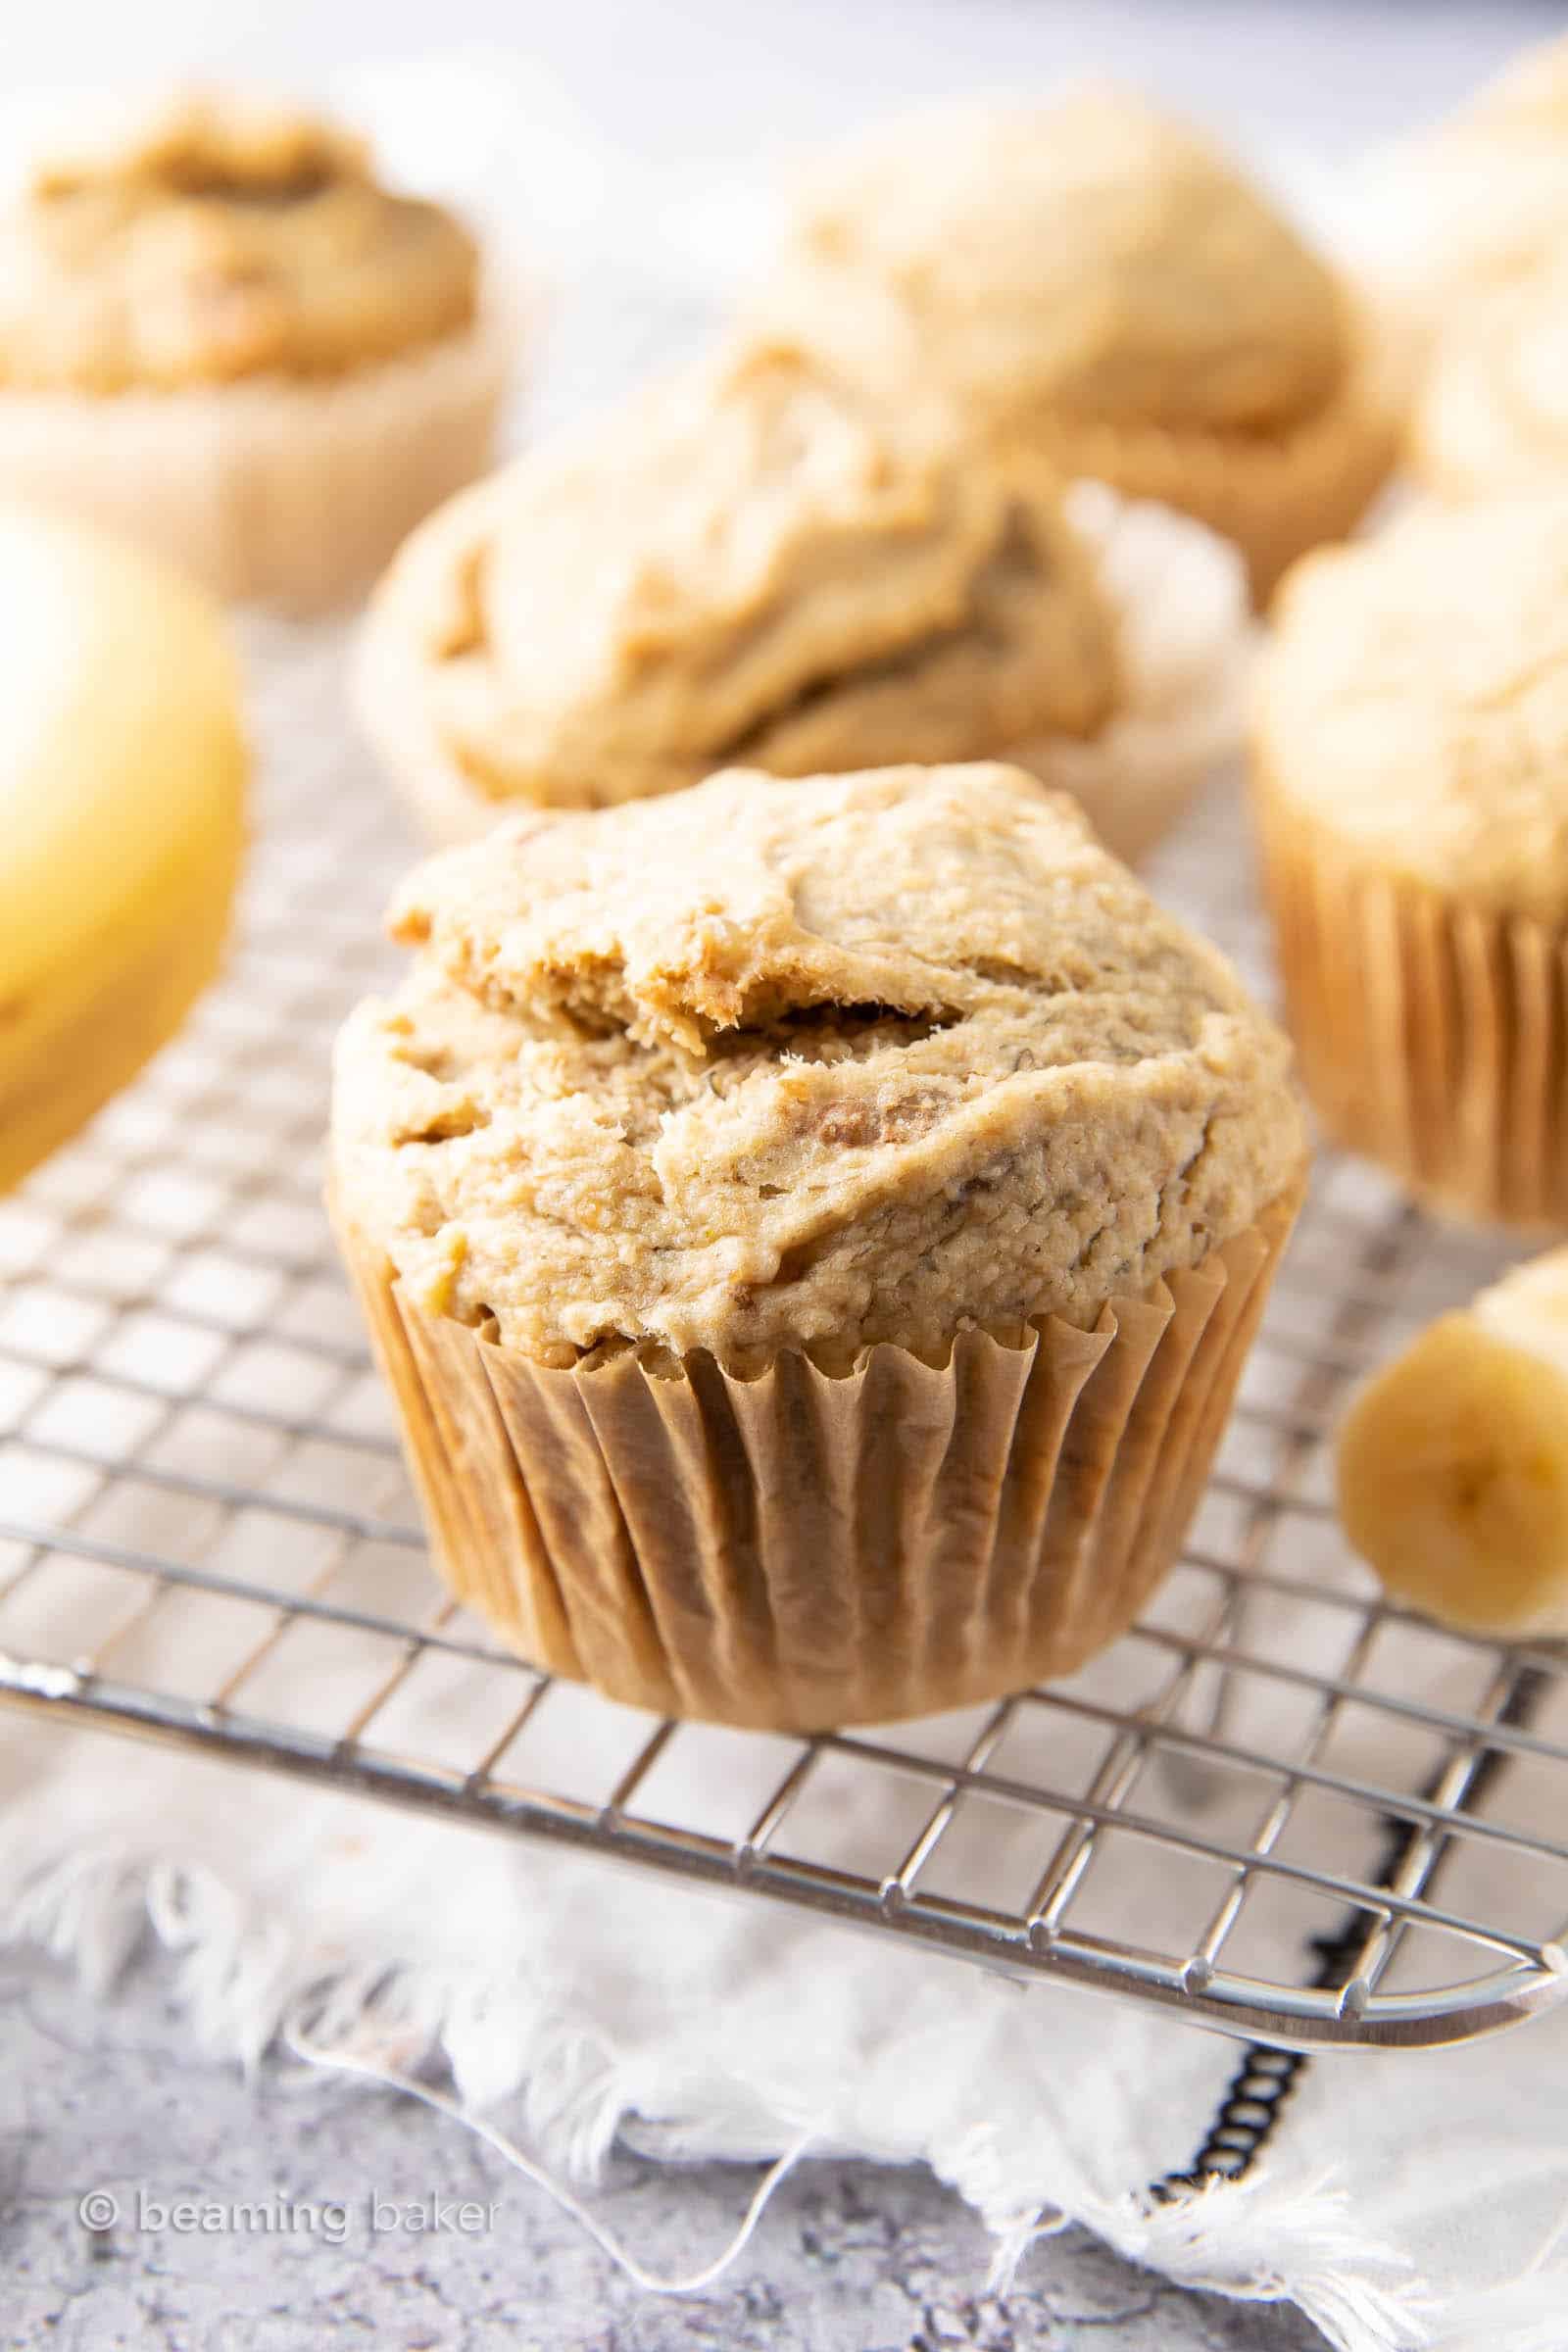 An easy recipe for Gluten Free Banana Muffins that are satisfyingly dense and rich, with just a bit of fluffiness and delicious medium sweet banana flavor. #GlutenFree #Banana #Muffins | Recipe at BeamingBaker.com 